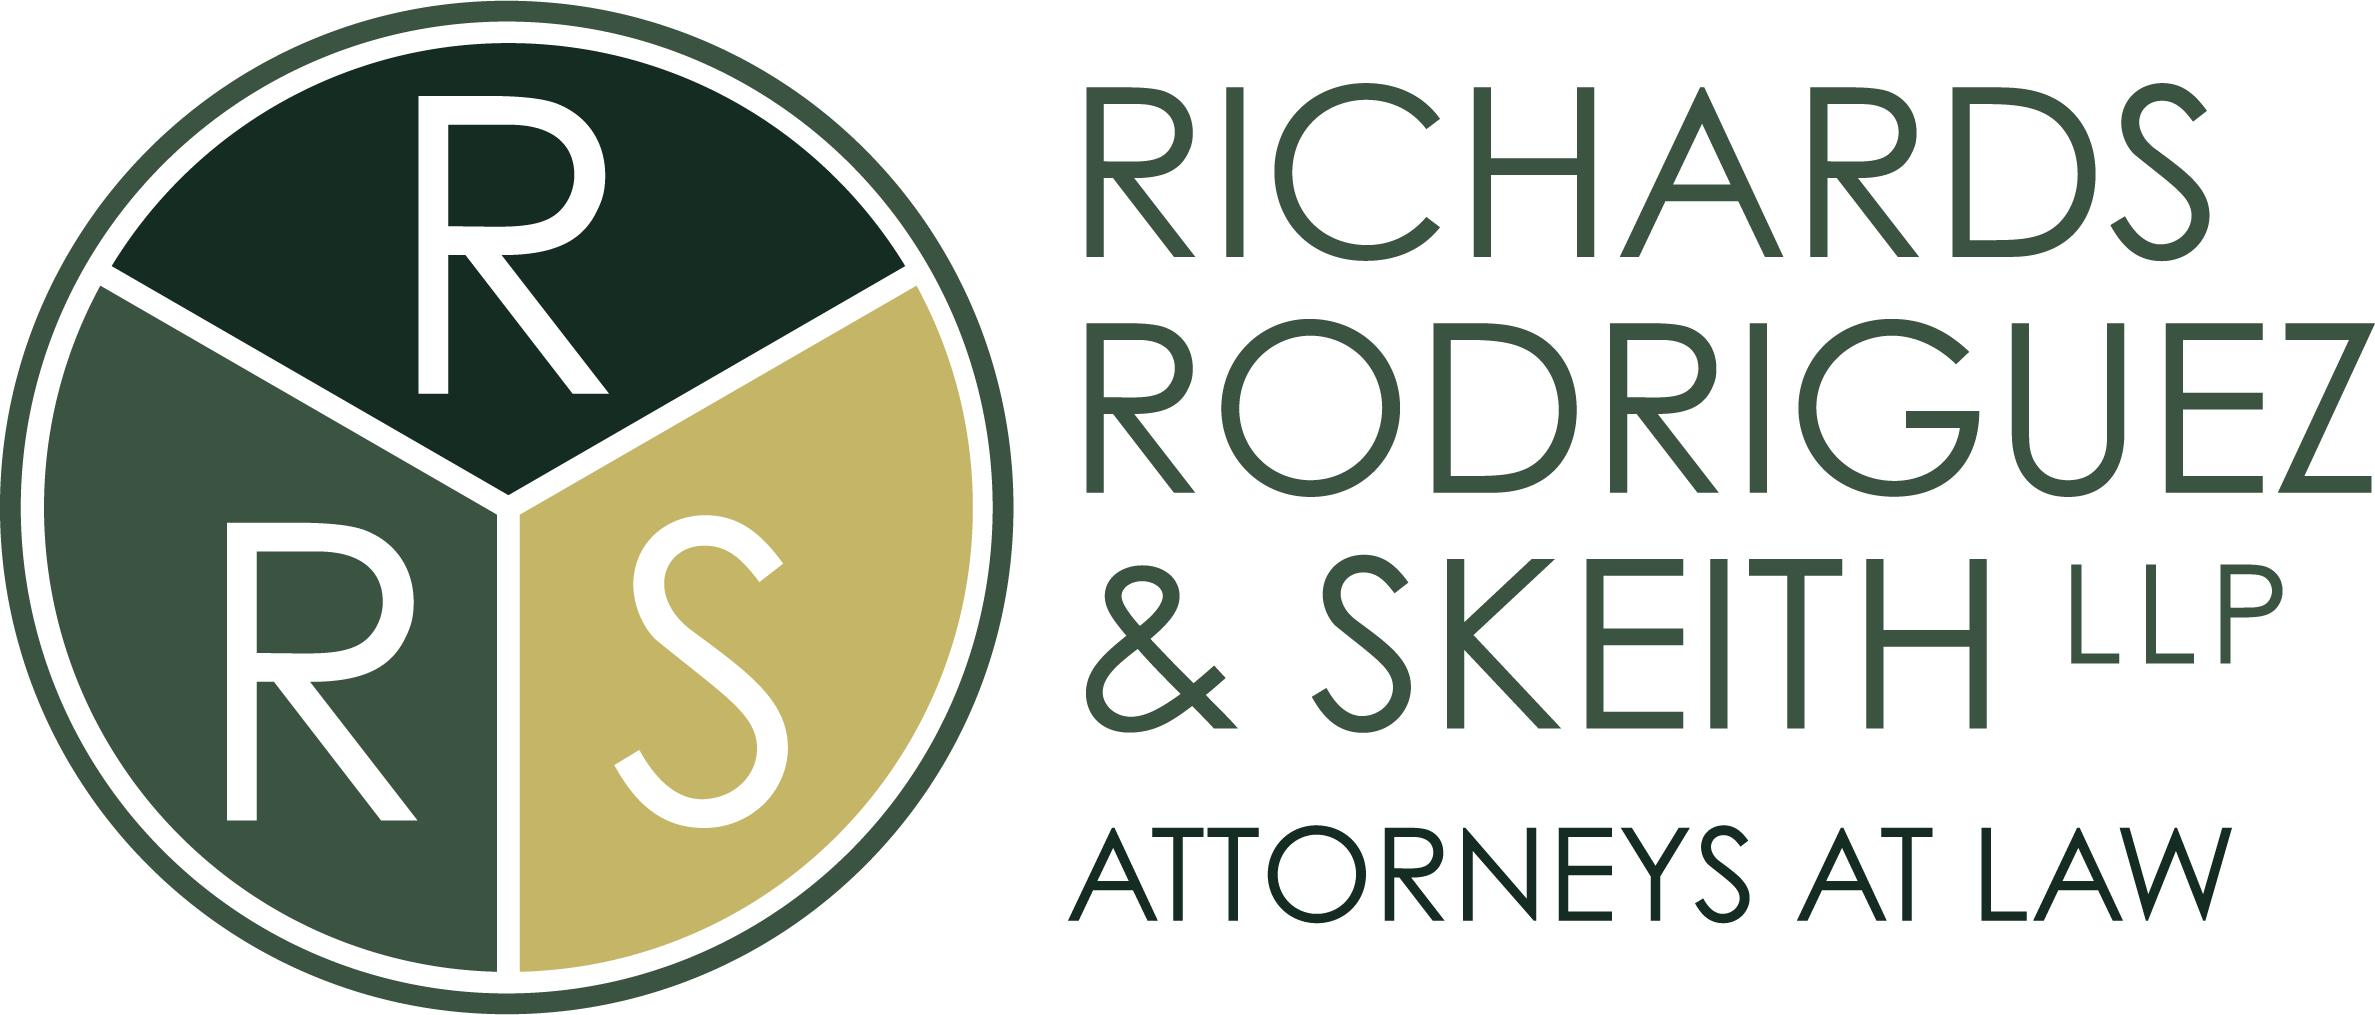 Richards Rodriguez and Skeith LLP